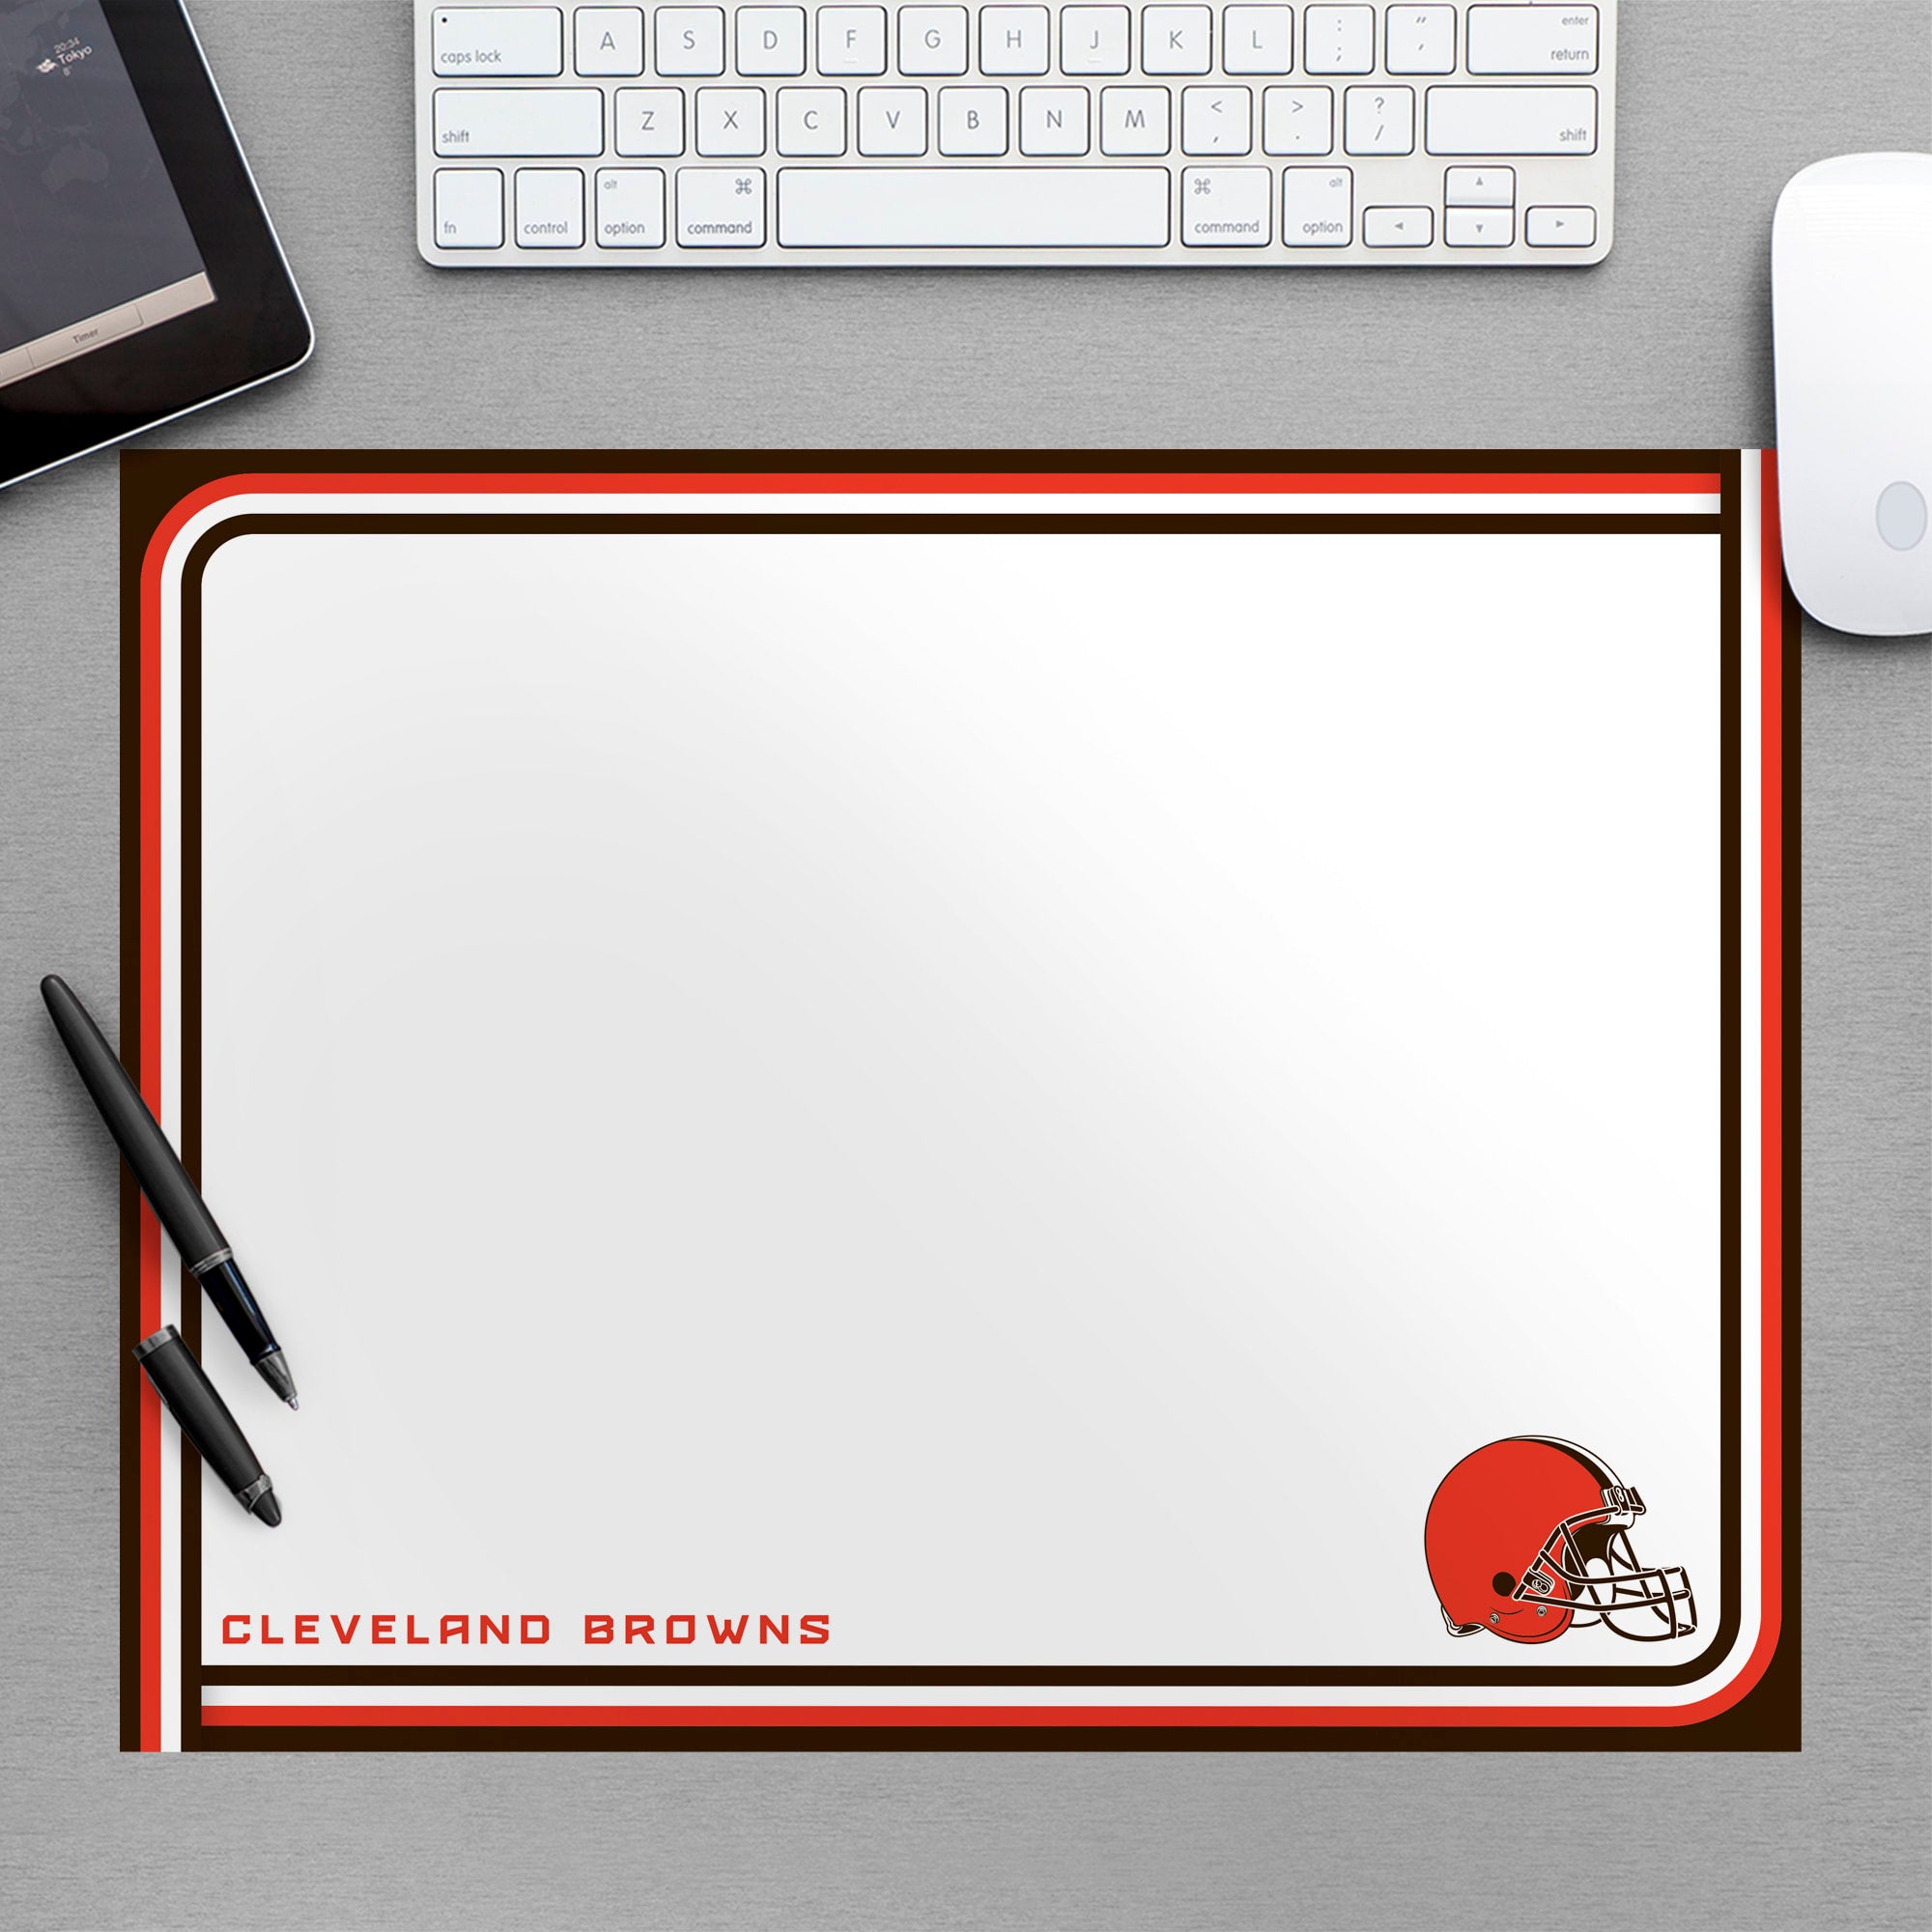 Cleveland Browns: Dry Erase Whiteboard - Officially Licensed NFL Removable Wall Decal Large by Fathead | Vinyl